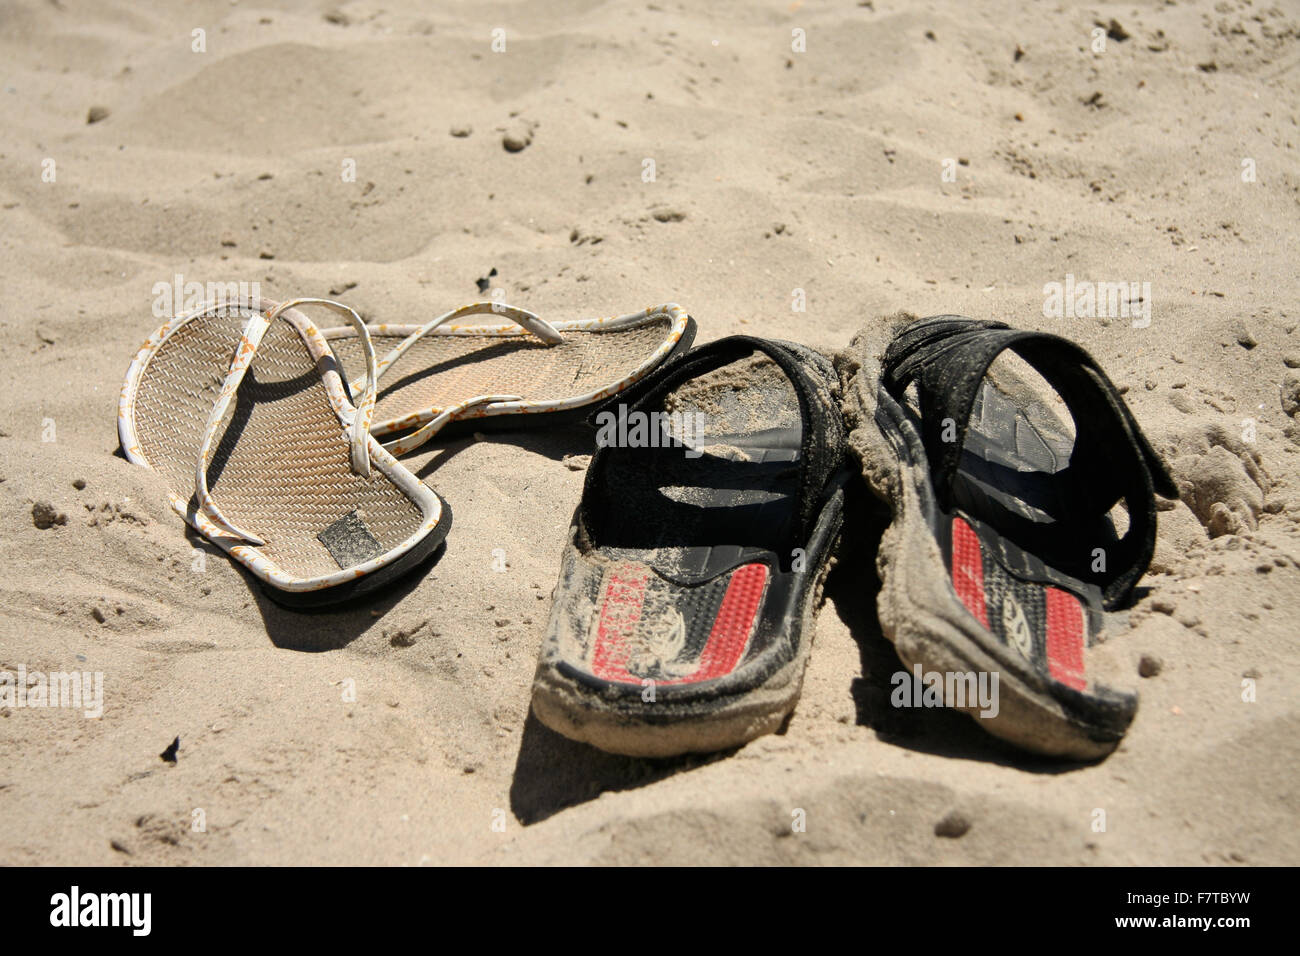 Male and female sandals standing on the sand, Algeciras, Spain Stock Photo